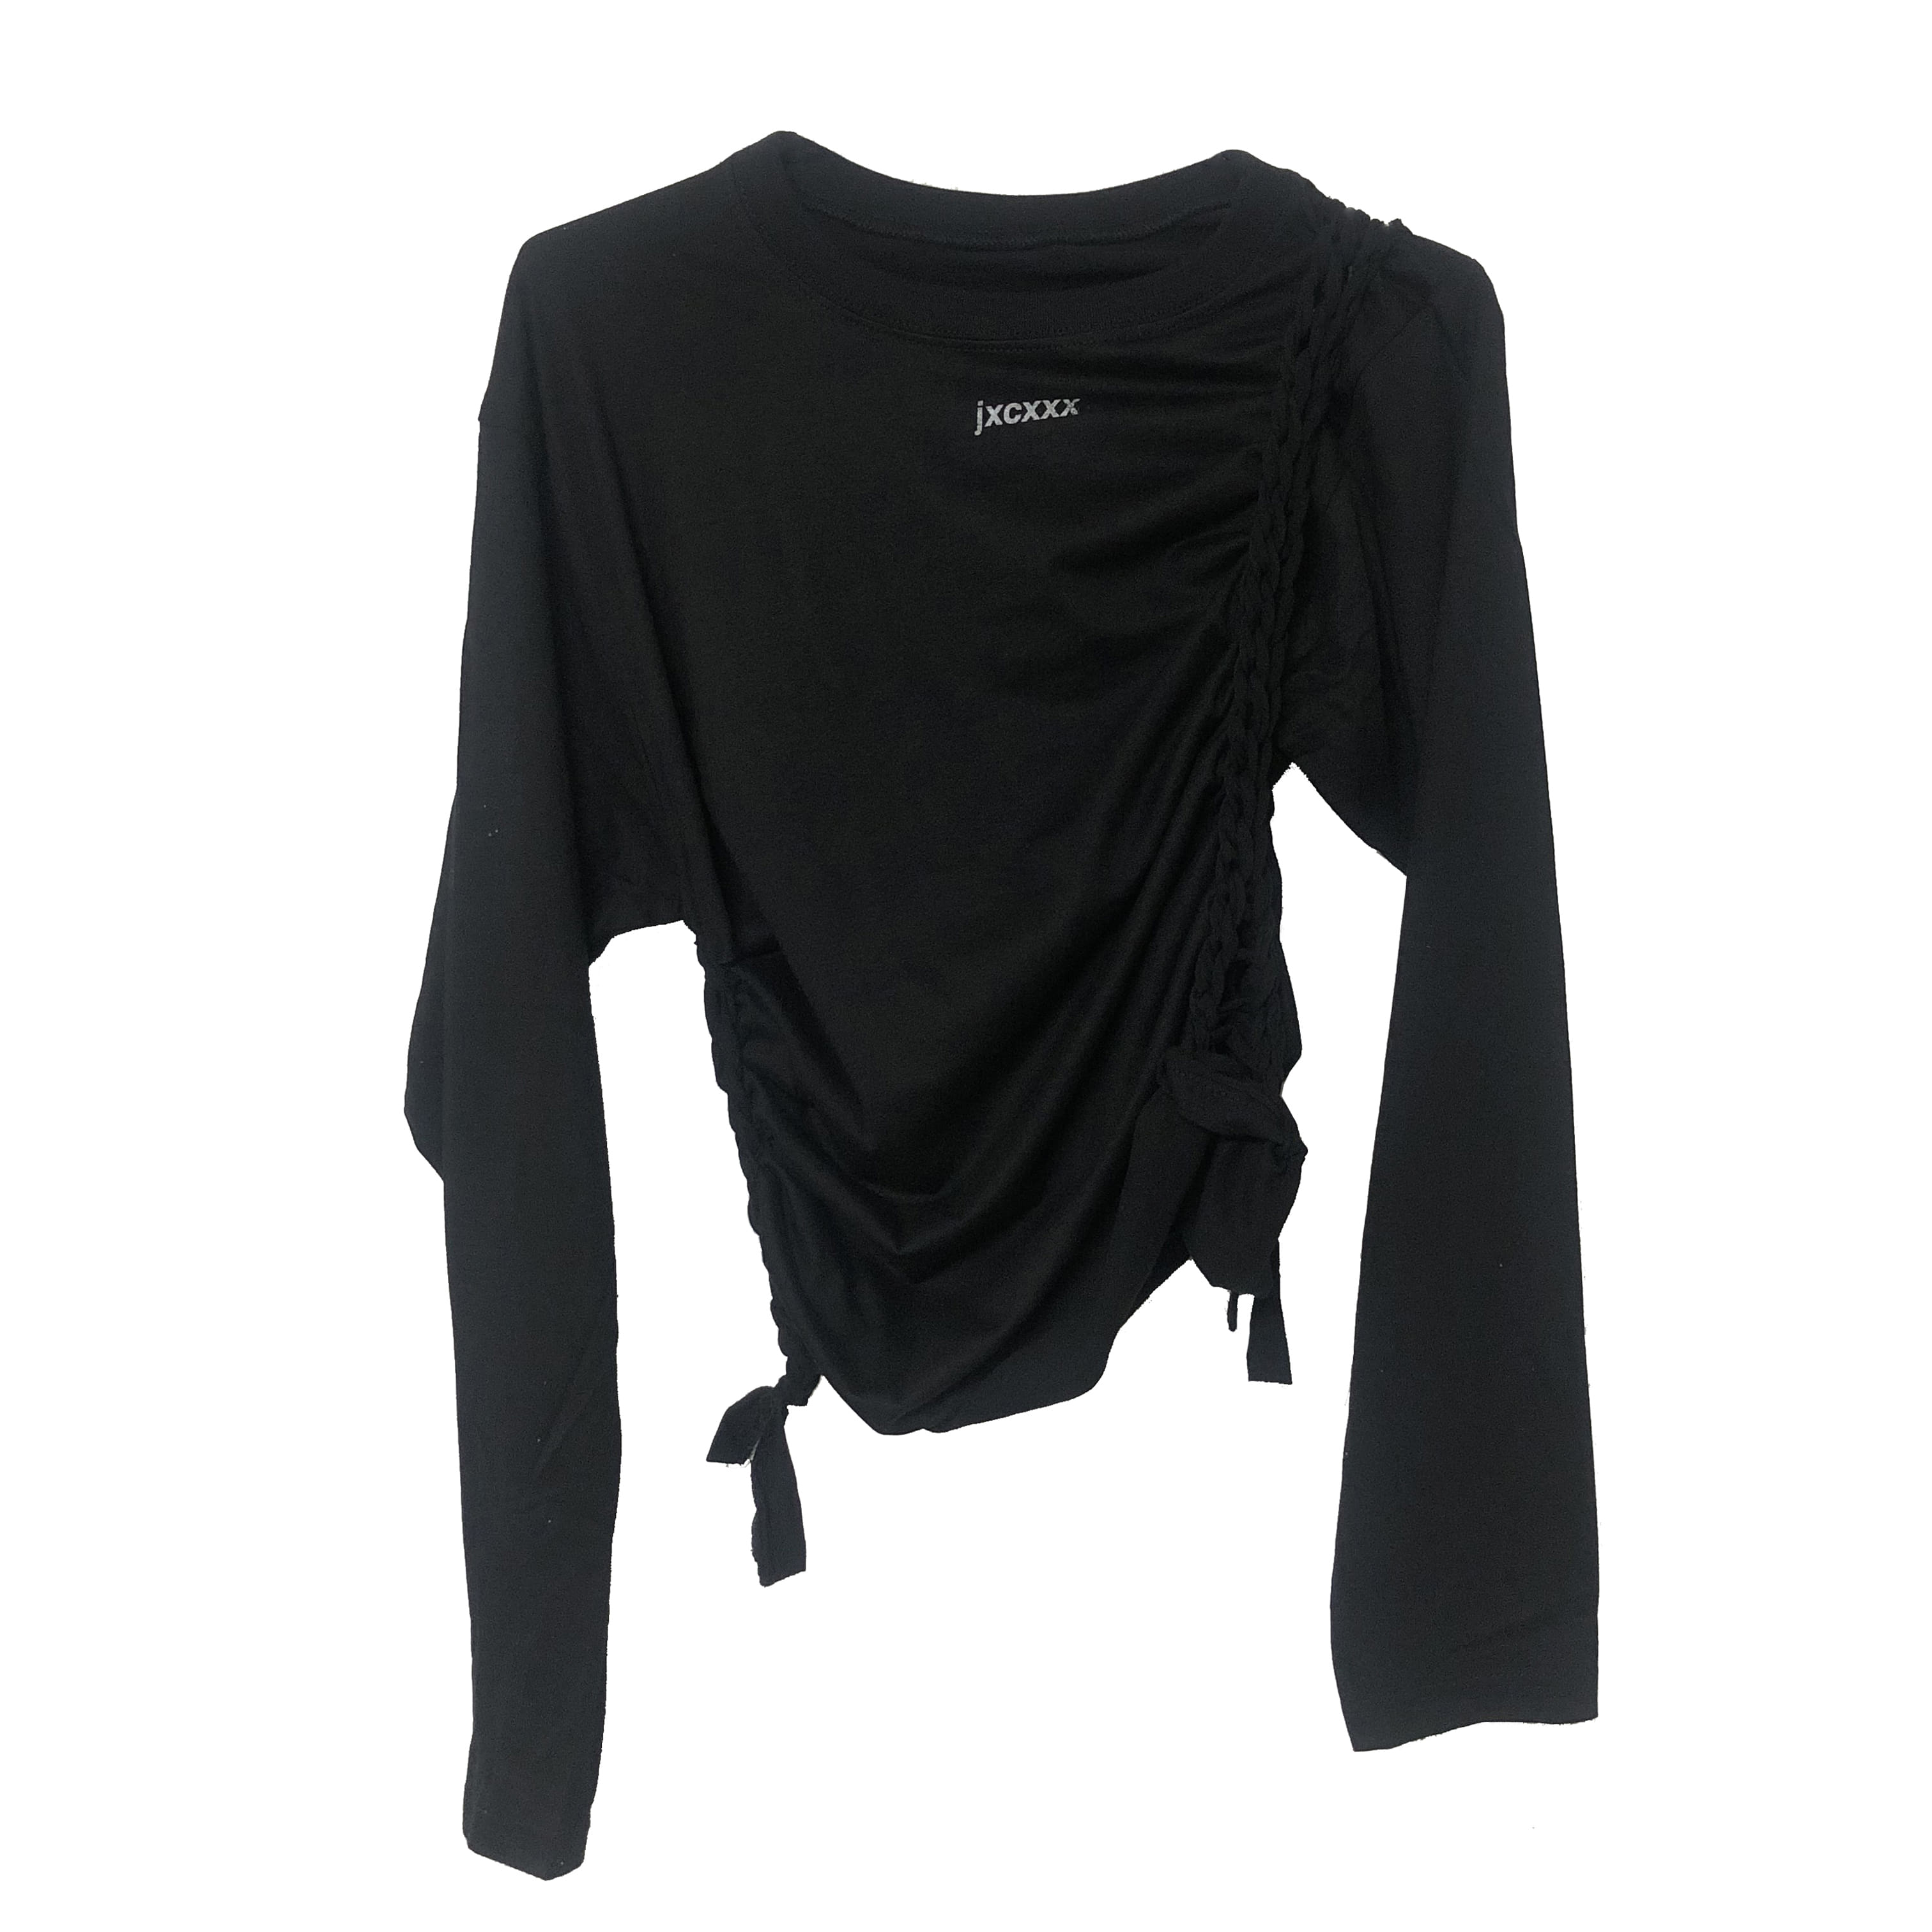 jxcxxx TWISTED LONG SLEEVES (BLACK)